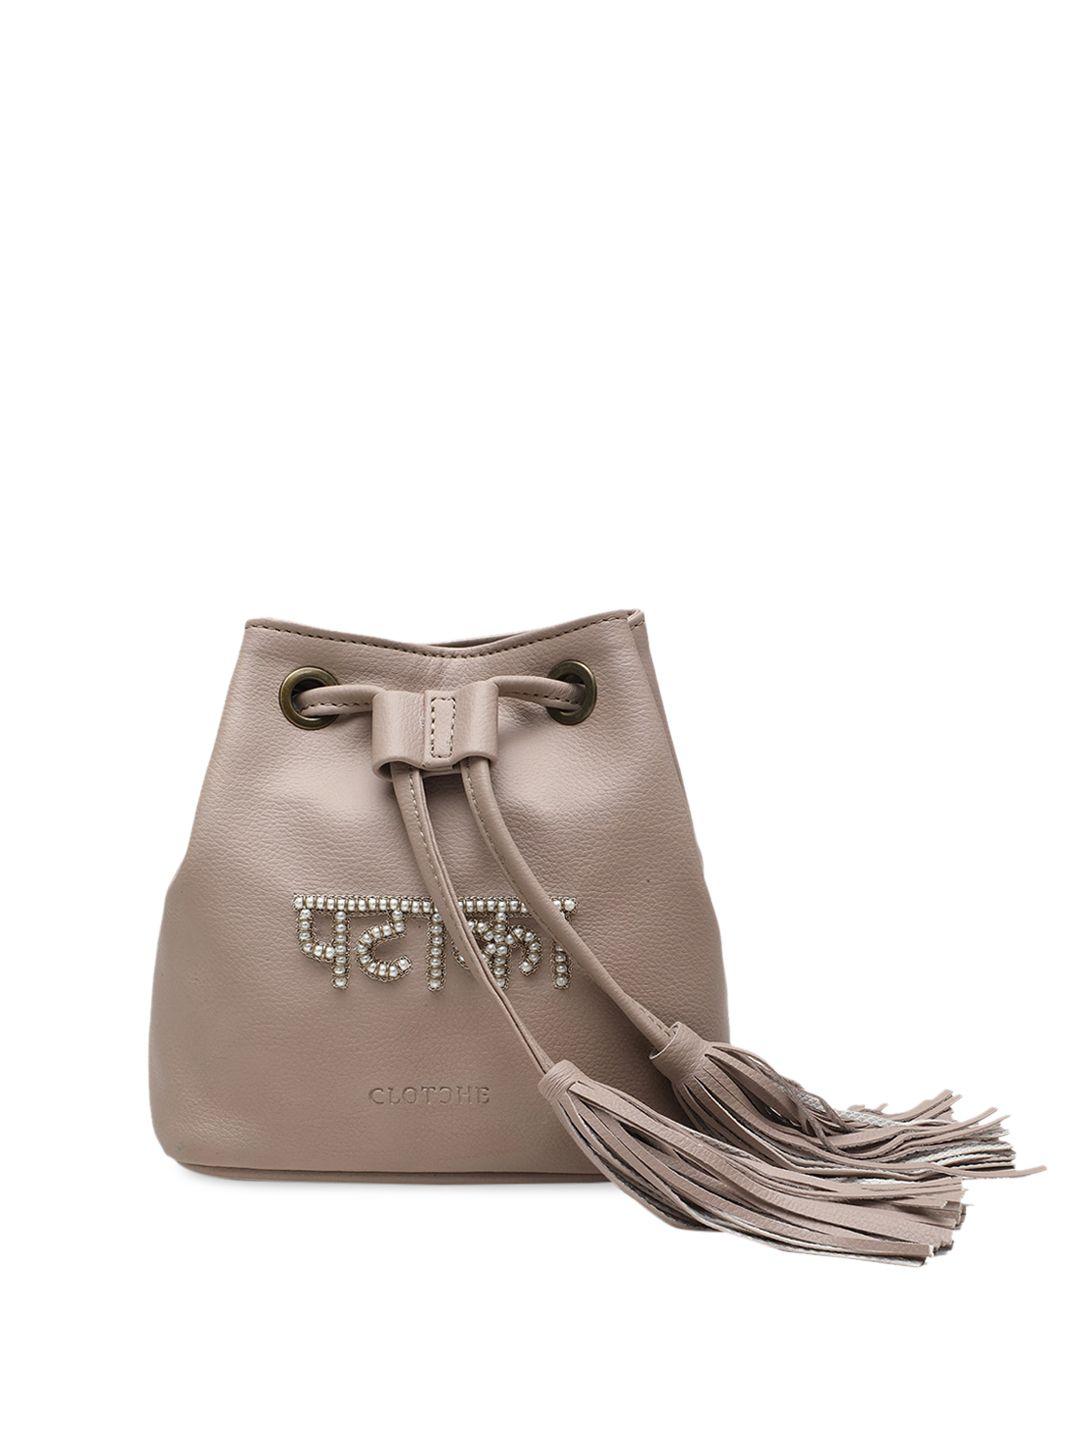 clotche beige pu bucket sling bag with bow detail